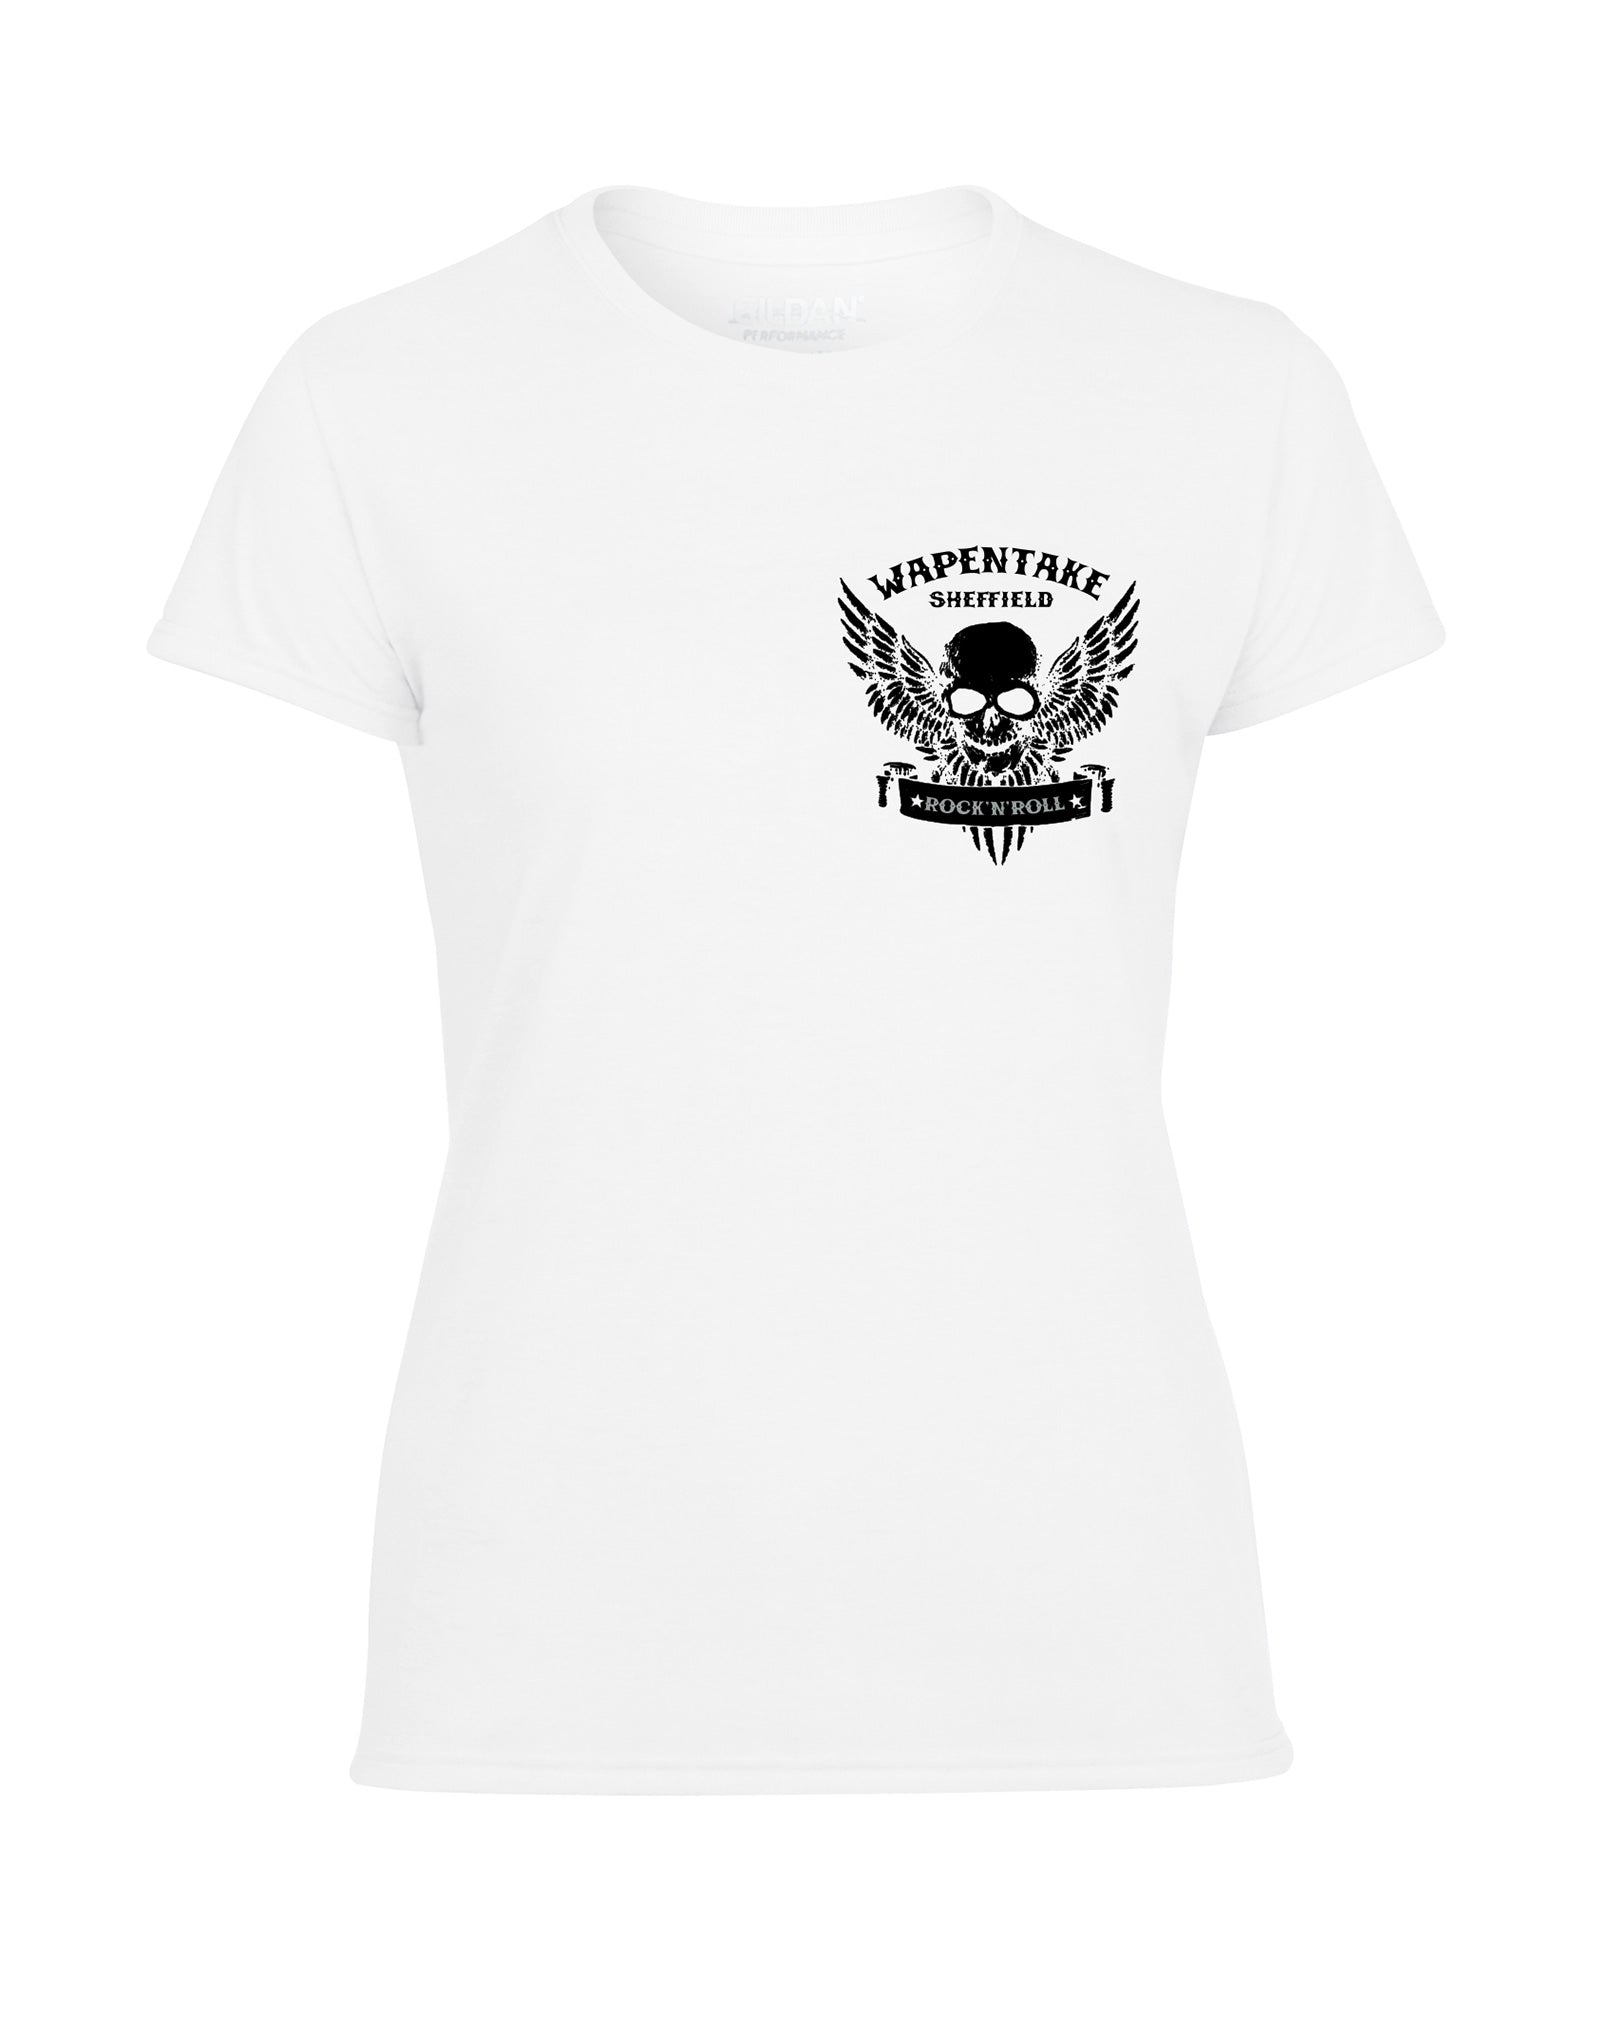 Wapentake small skull/wings ladies fit T-shirt - various colours - Dirty Stop Outs